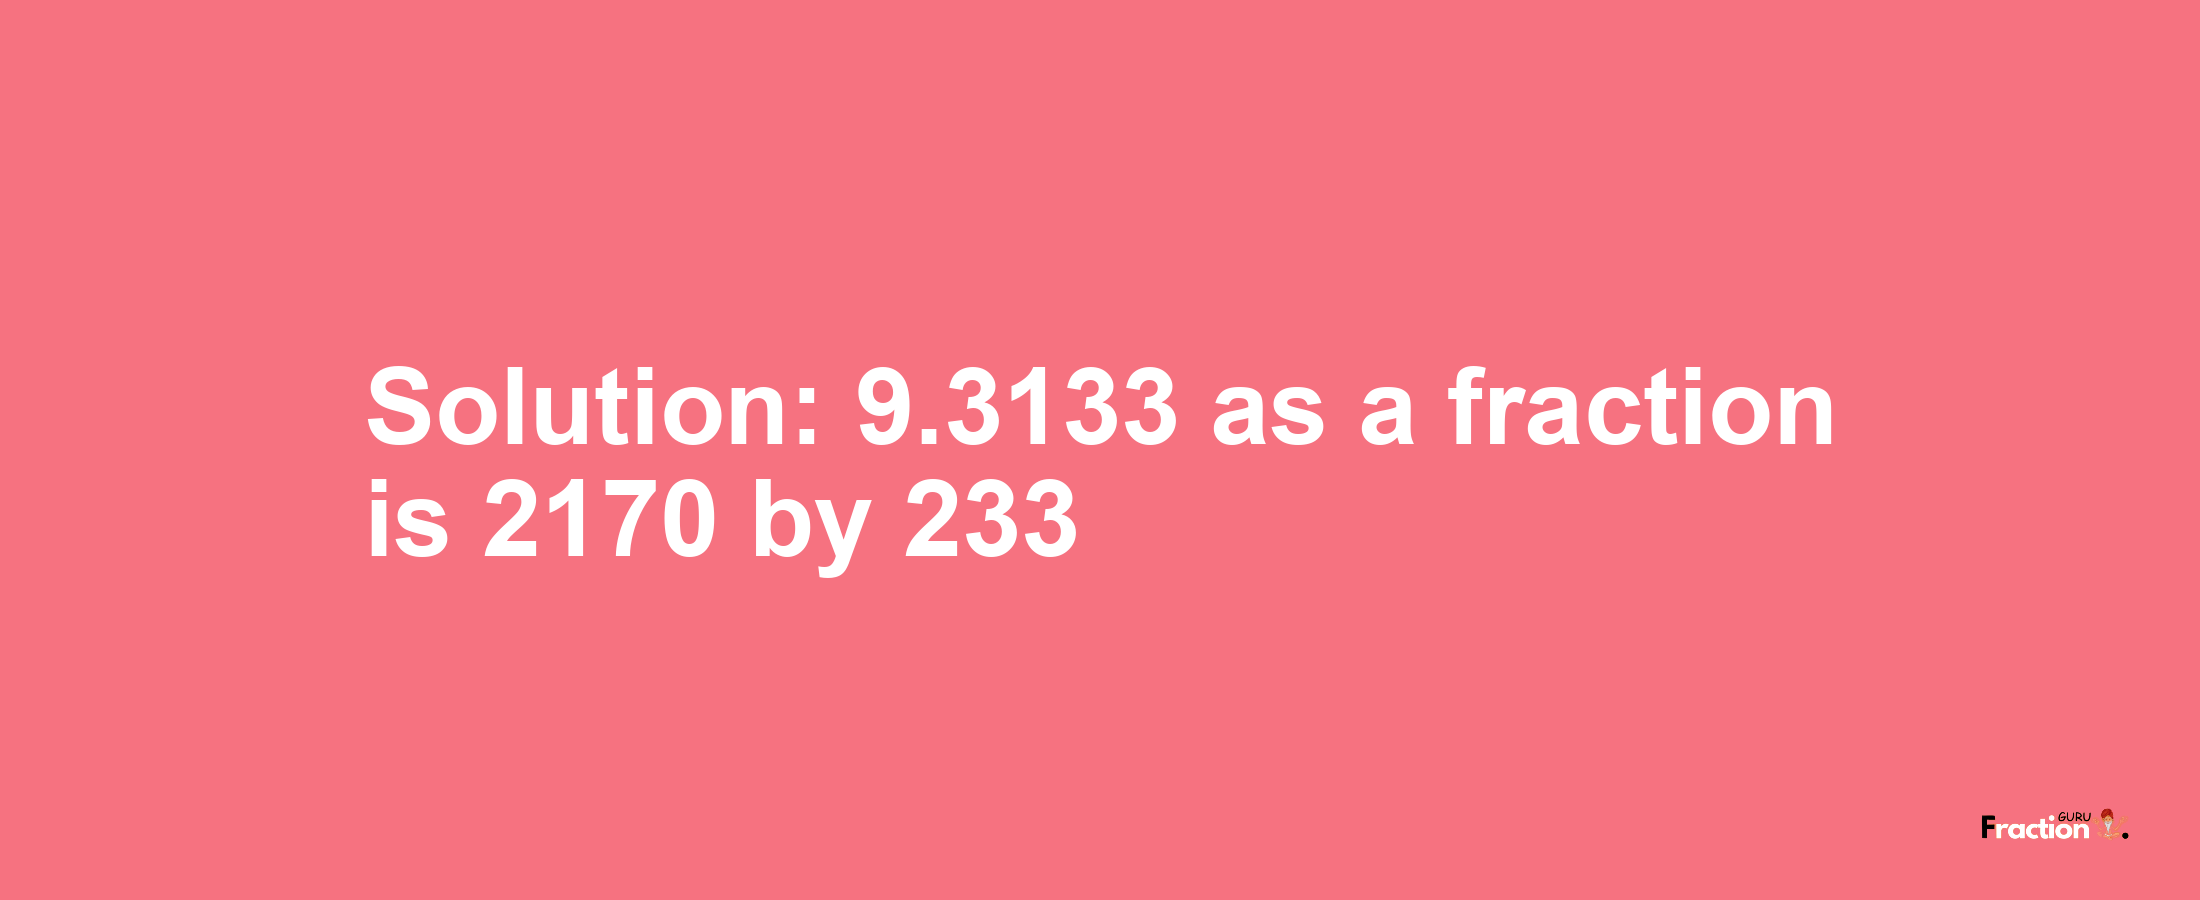 Solution:9.3133 as a fraction is 2170/233